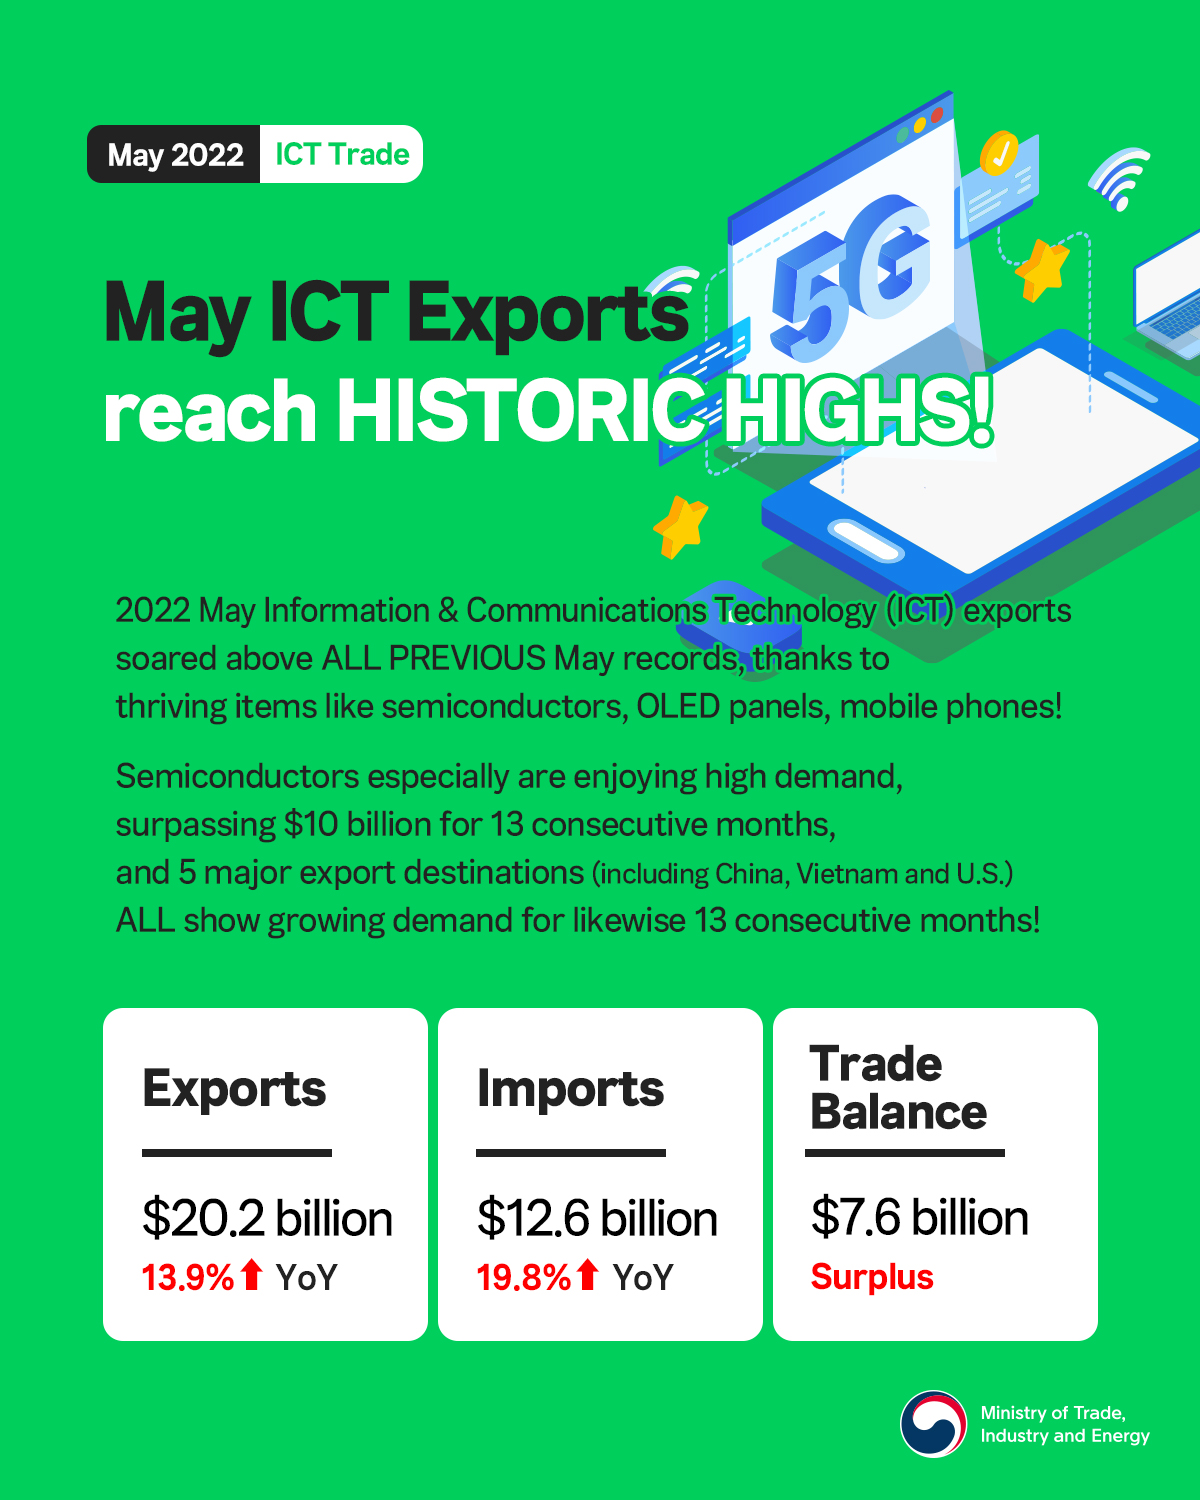 Korea's ICT exports achieve record highs for May!